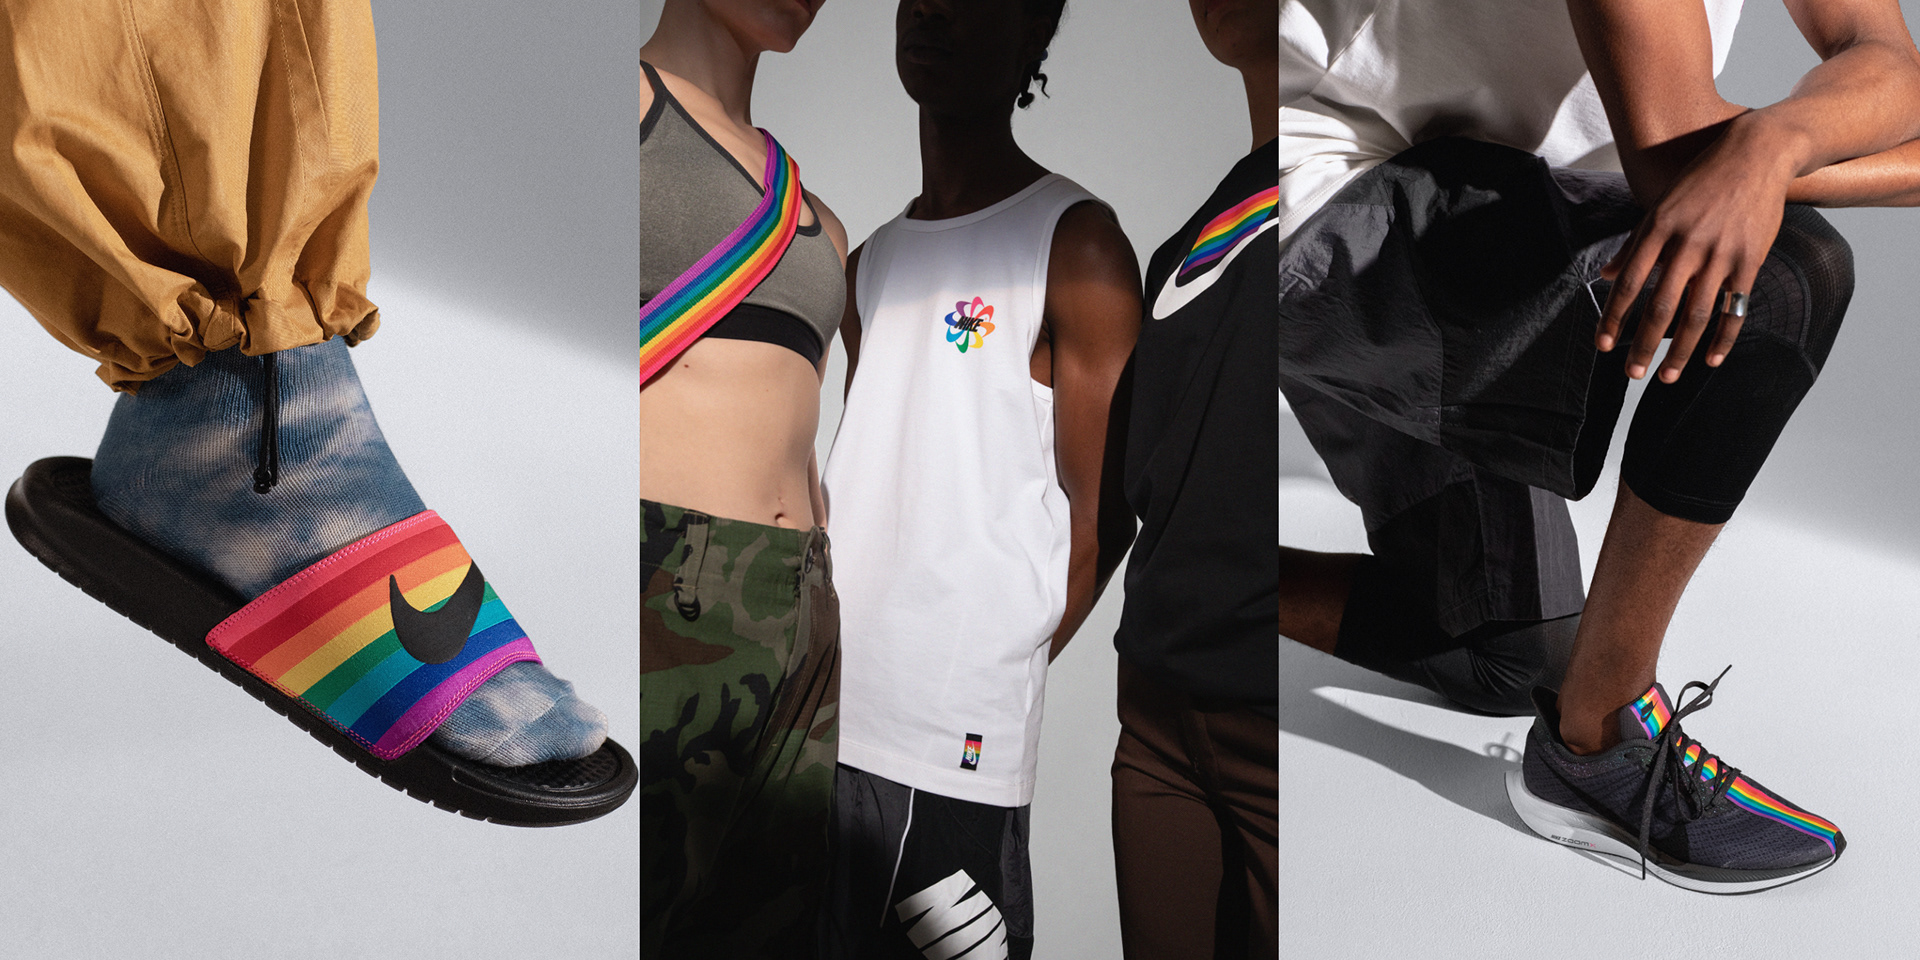 #Pride Nike BETRUE Campaign: Celebrating Unity and Equality